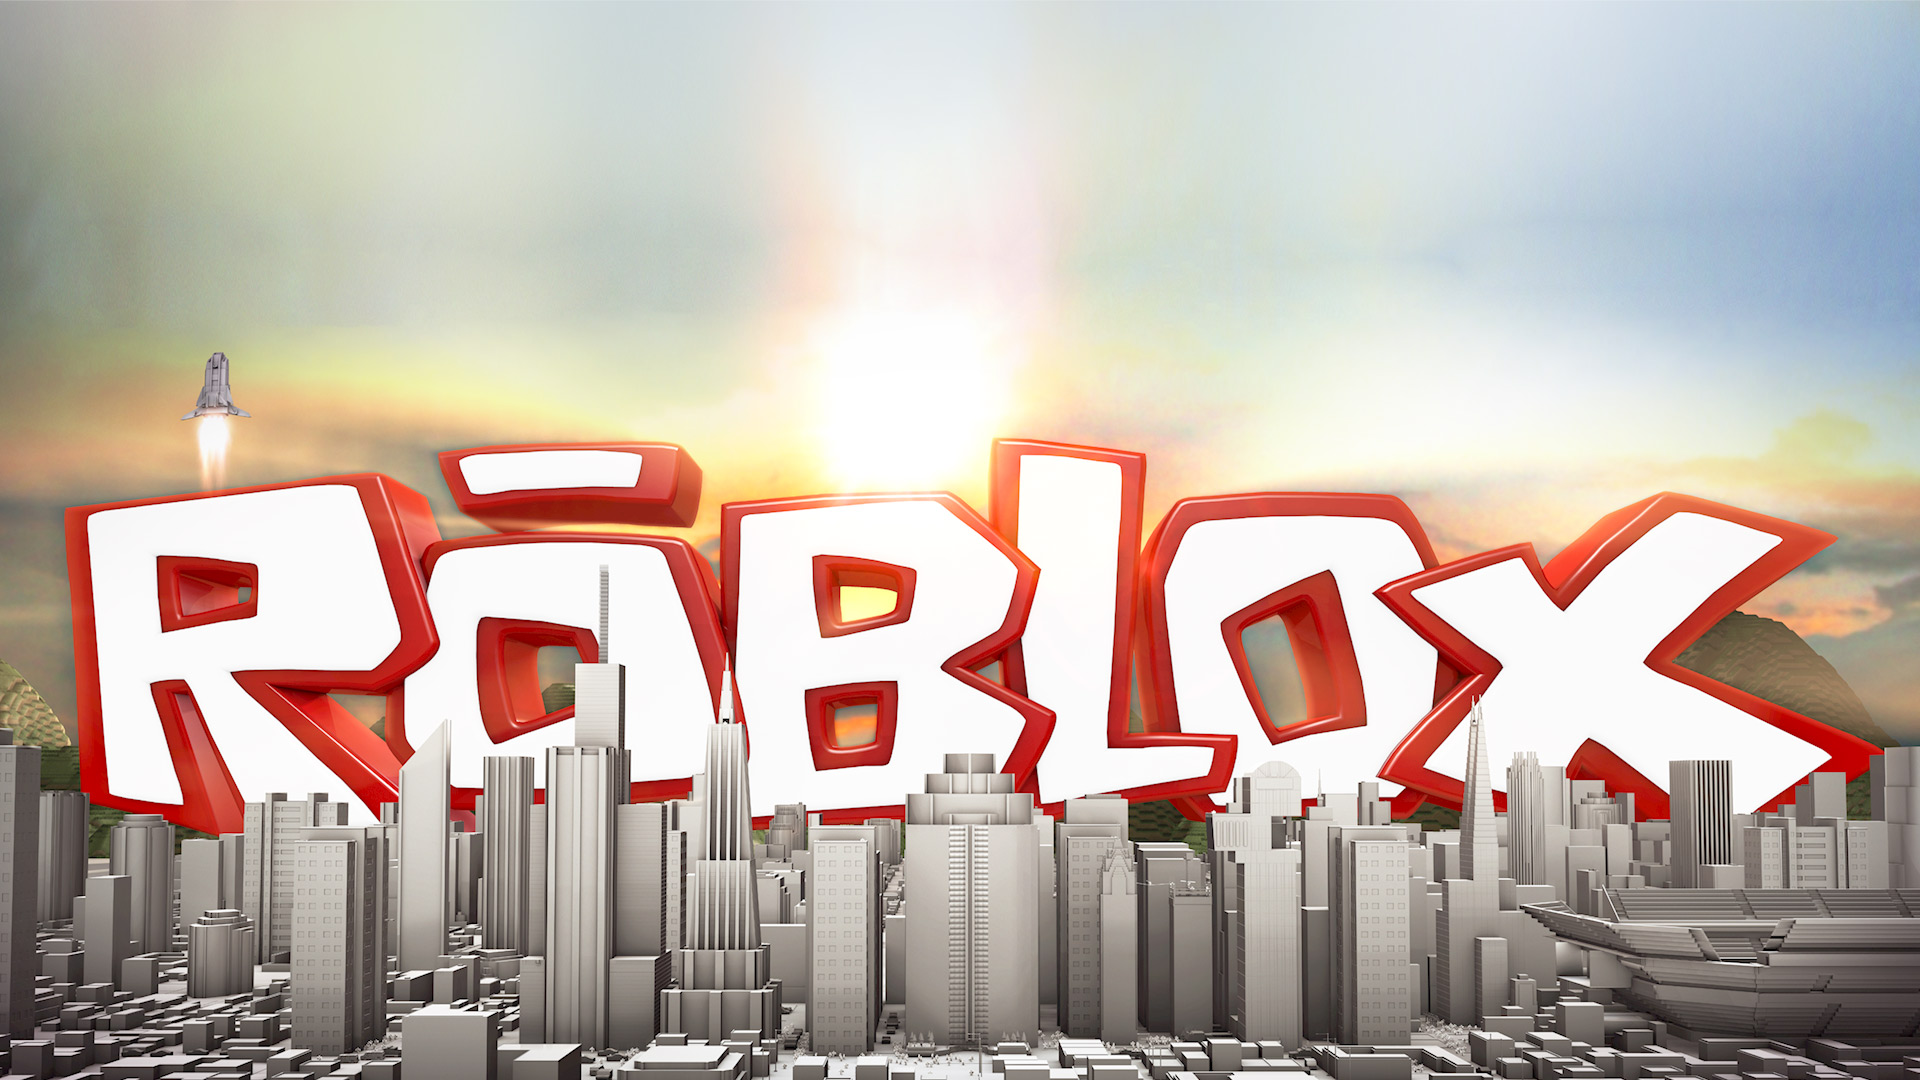 How To Get Free Bctbcobc On Roblox 2018 Unpatched